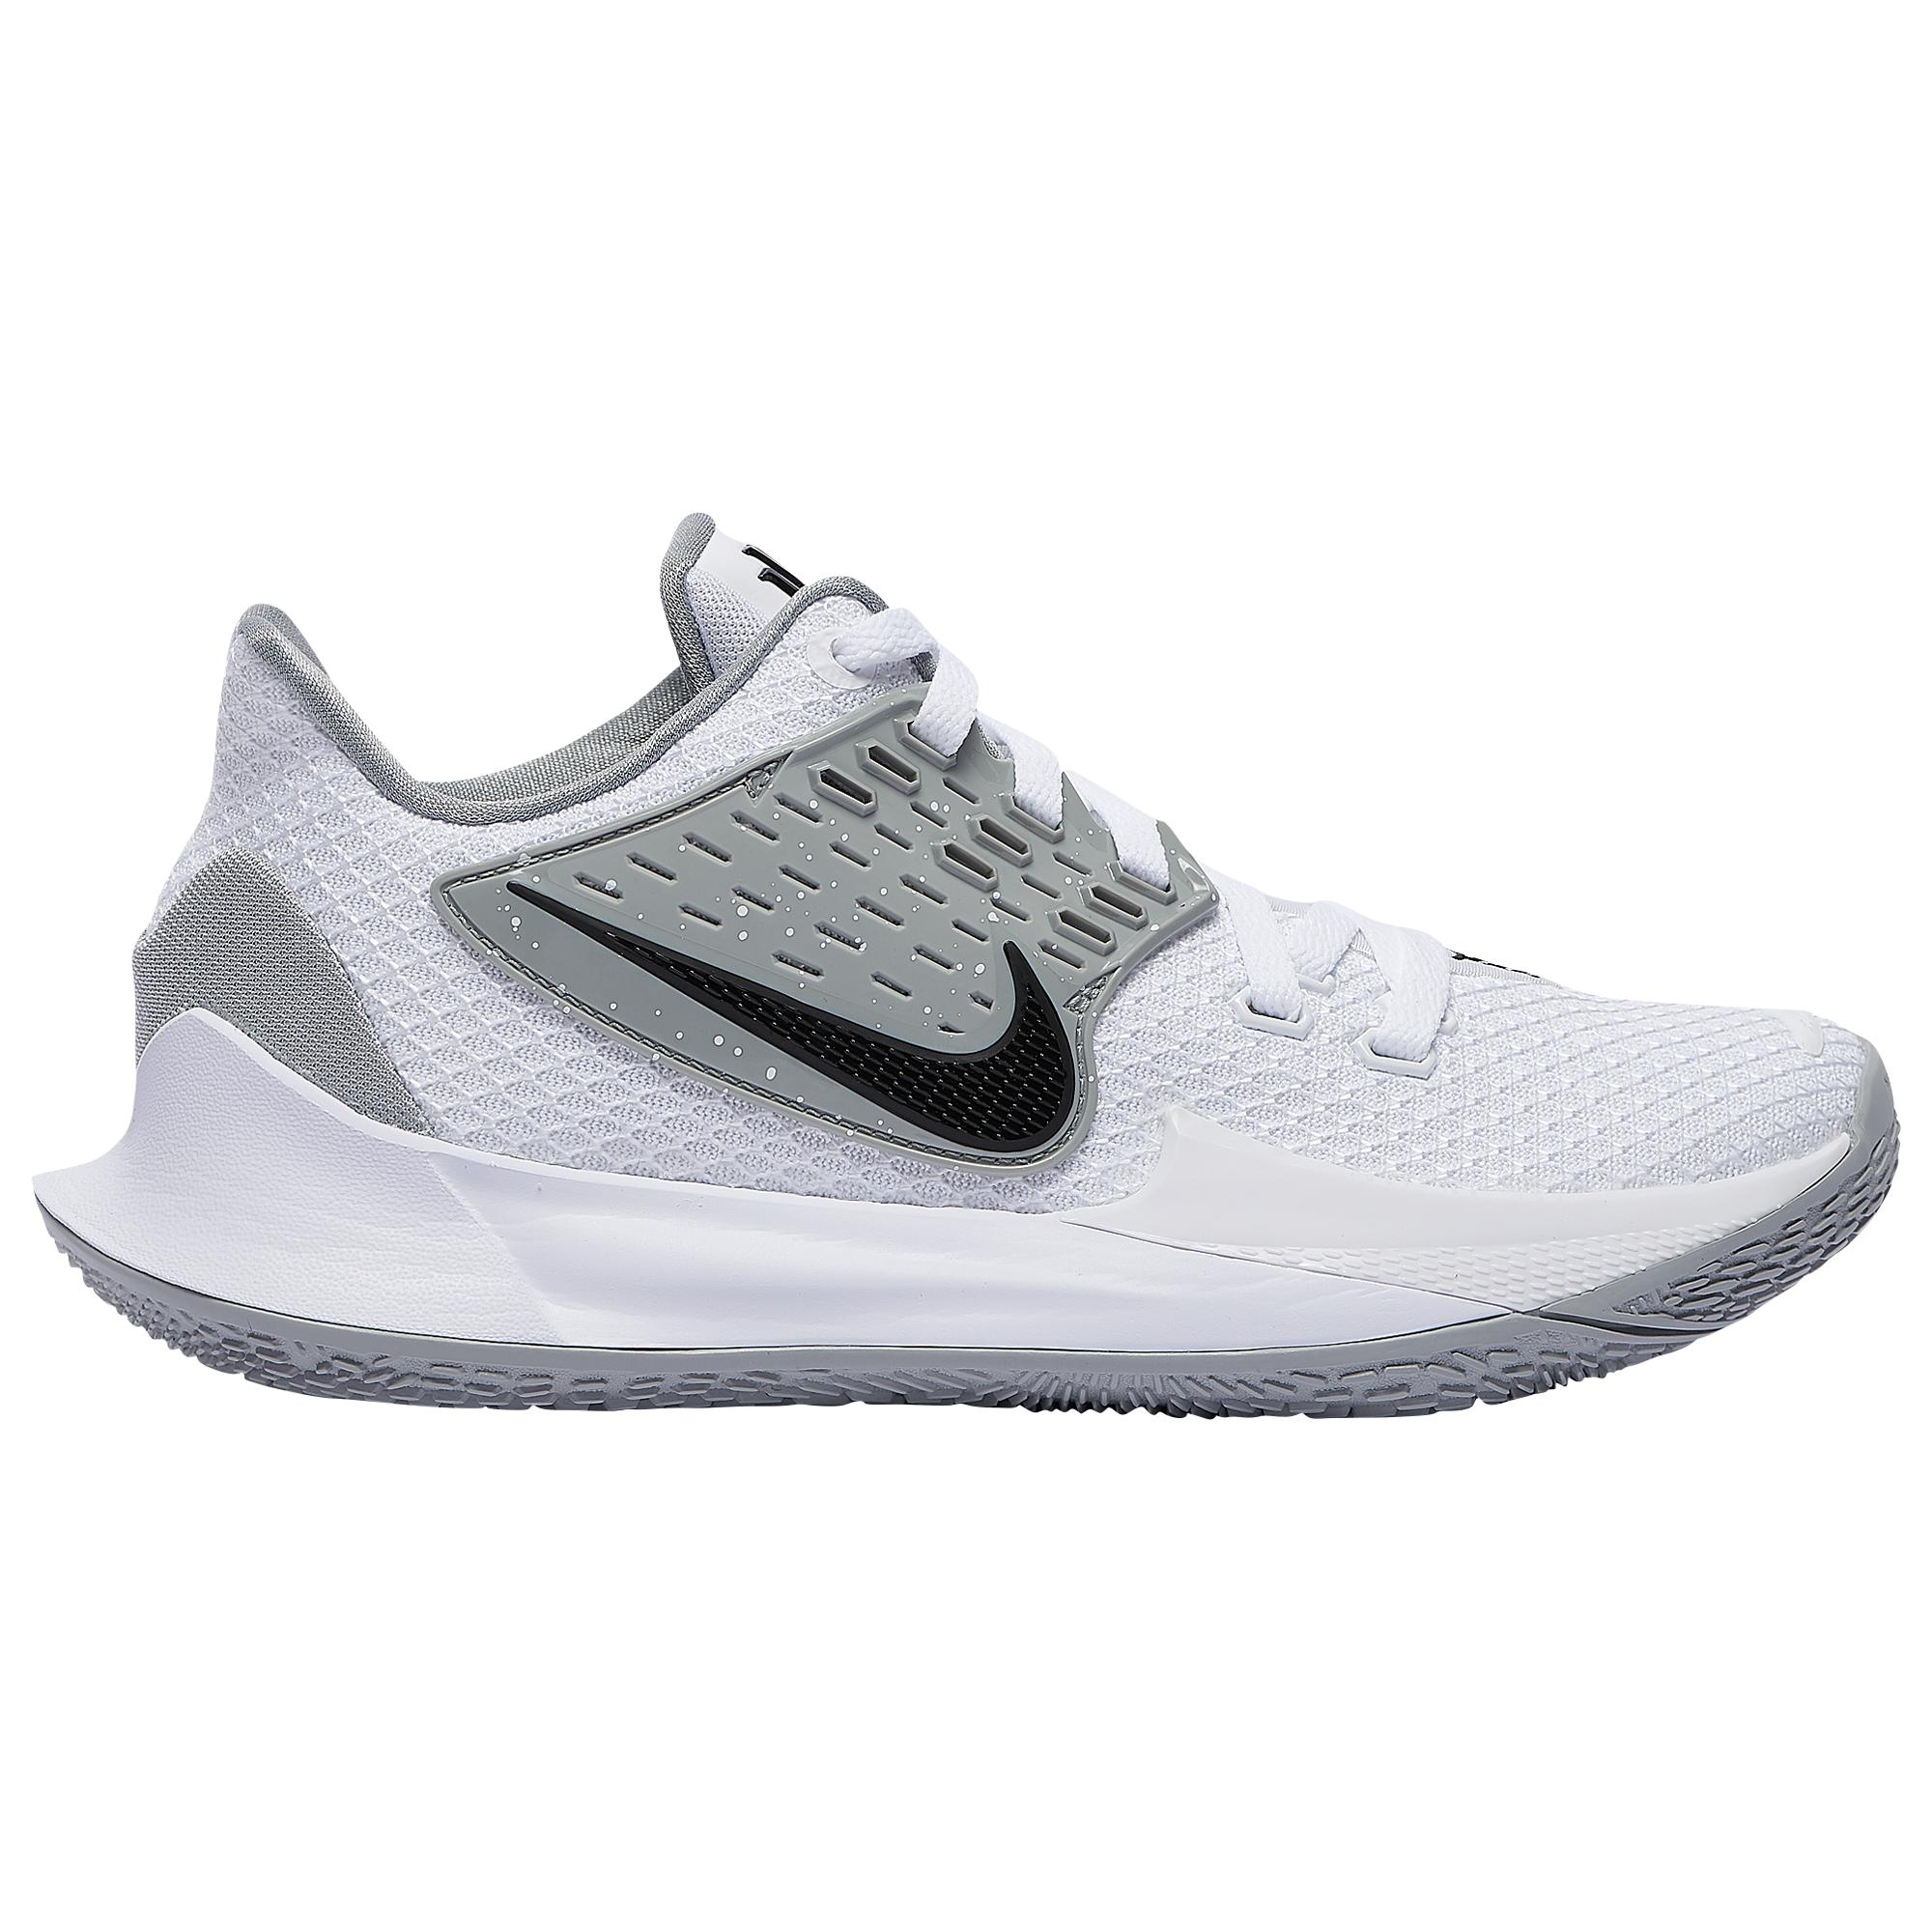 Nike Kyrie Low 2 in White/Black/Silver 